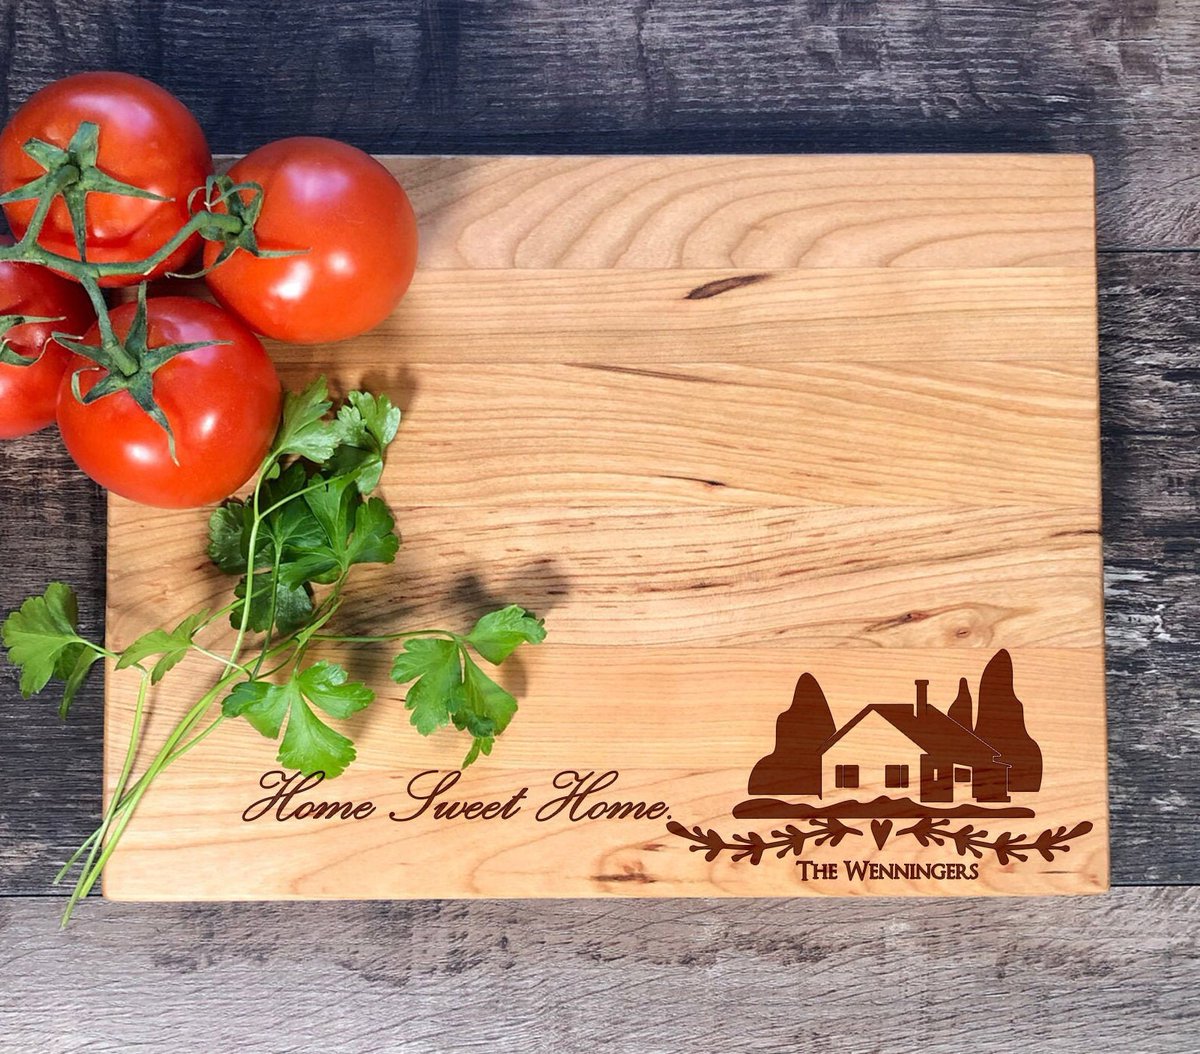 New Home Gift. Housewarming Gift. Cutting Board. Real Estate Marketing. Realtor Logo. Closing Gift. Real Estate. Free Logo On The Back #20 etsy.me/3JHih0P #housewarming #wood #cuttingboard #housewarminggift #closinggift #realtorgift #newhome #marketing #realtor